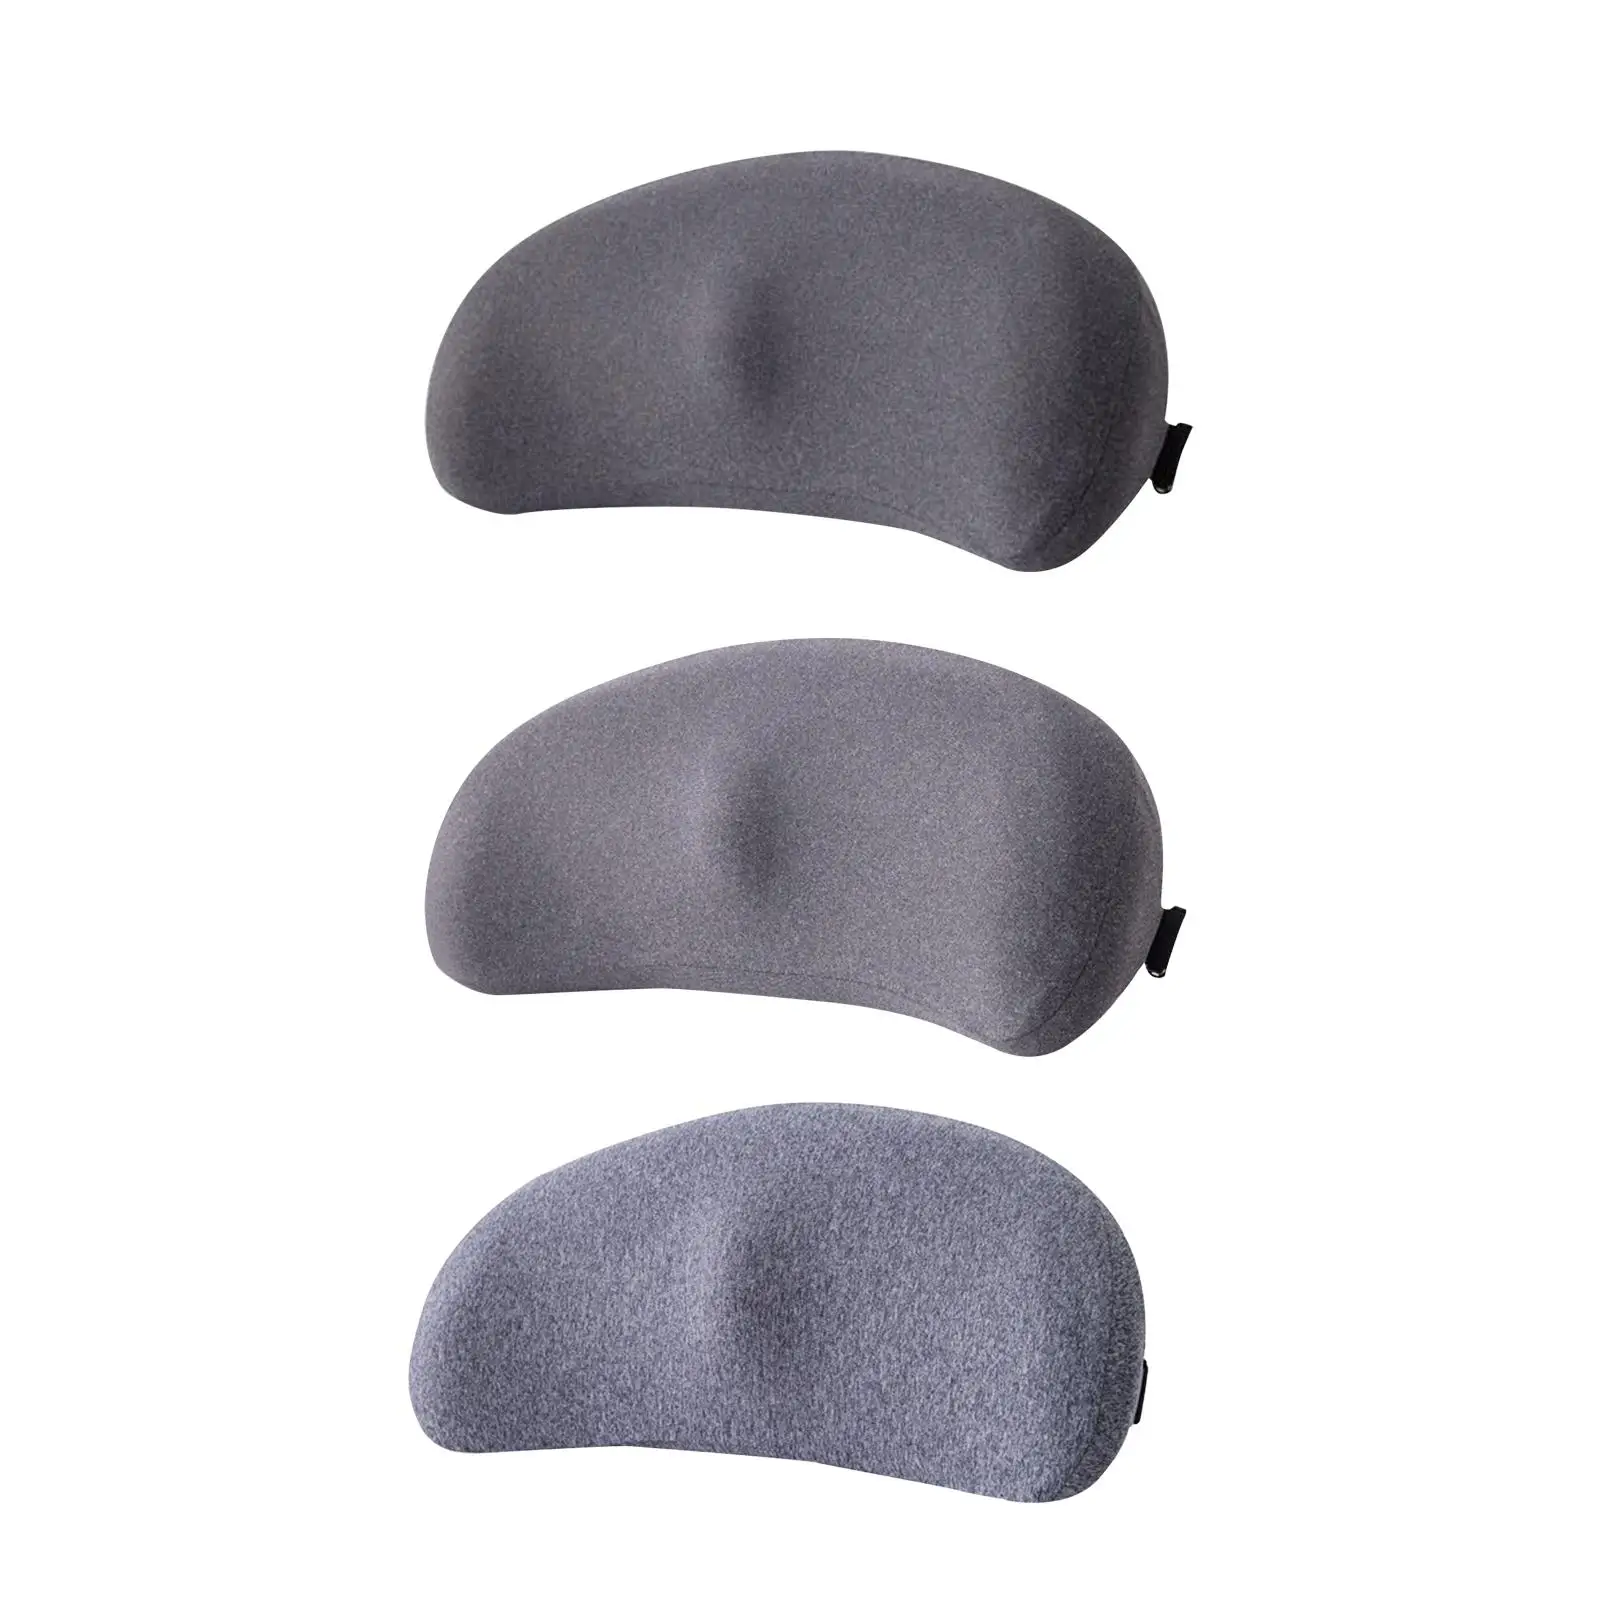 Lower Back Cushion Memory Foam Chair Pads for Sleeping Rest recliner Home Travel